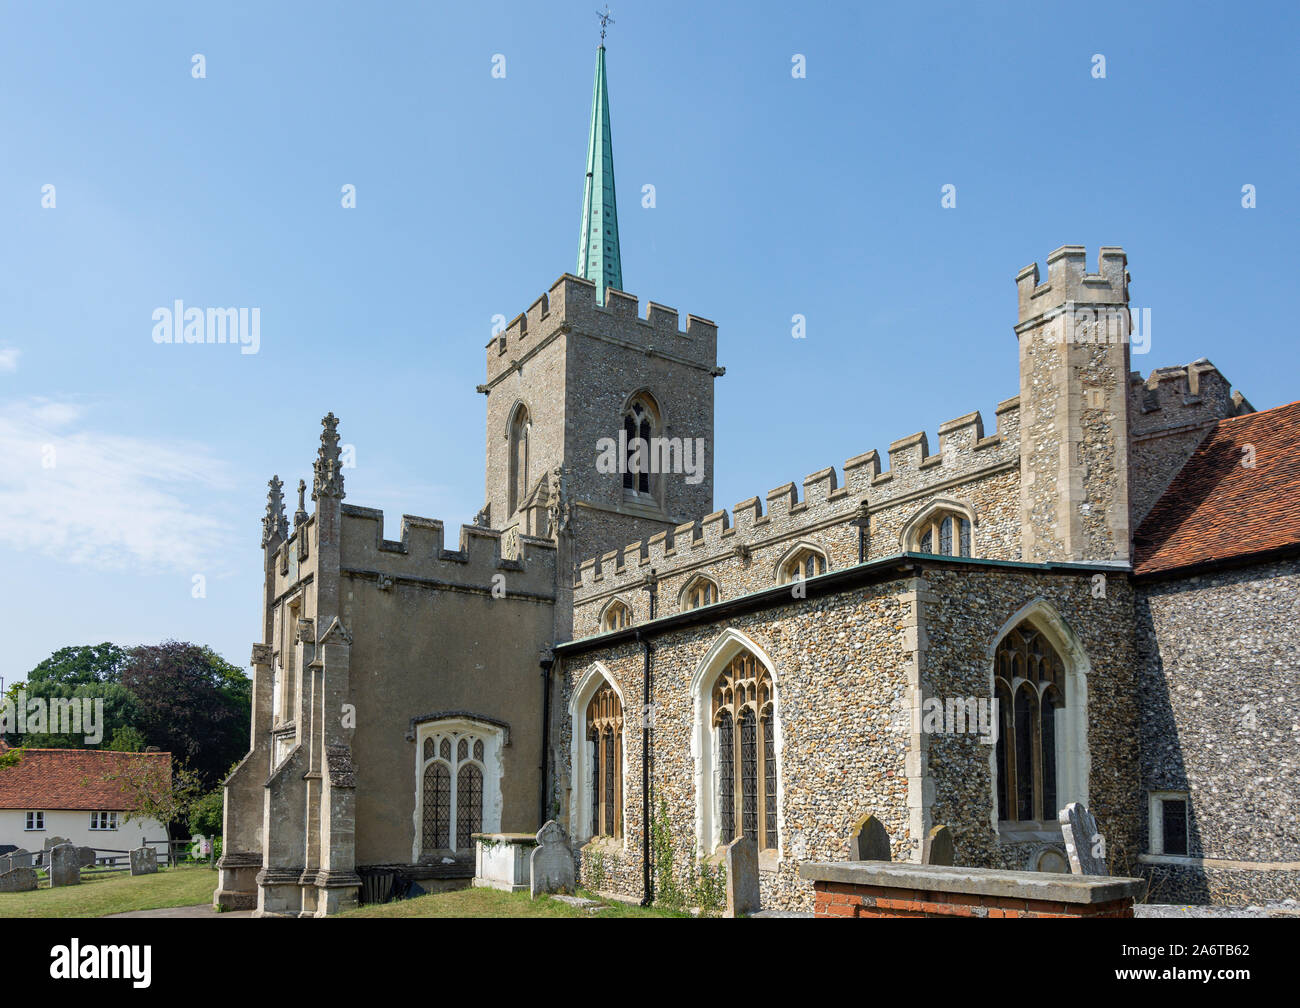 St Marie la Vierge, l'Eglise Fin, Braughing, Hertfordshire, Angleterre, Royaume-Uni Banque D'Images